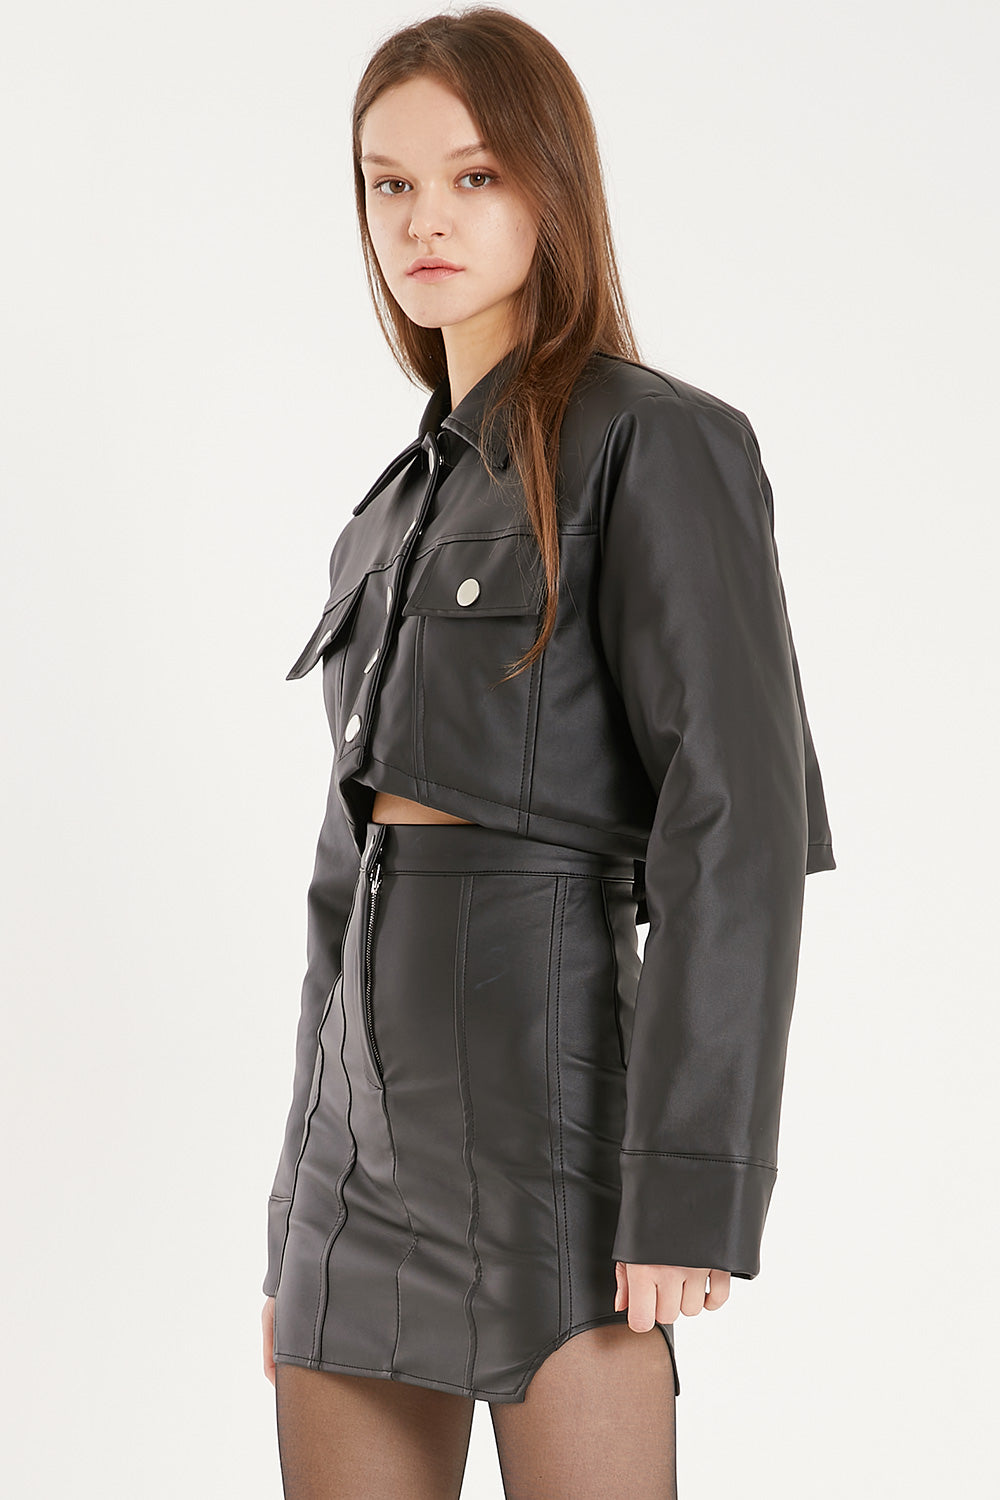 Jackets & Coats | Online Shopping for Women | storets